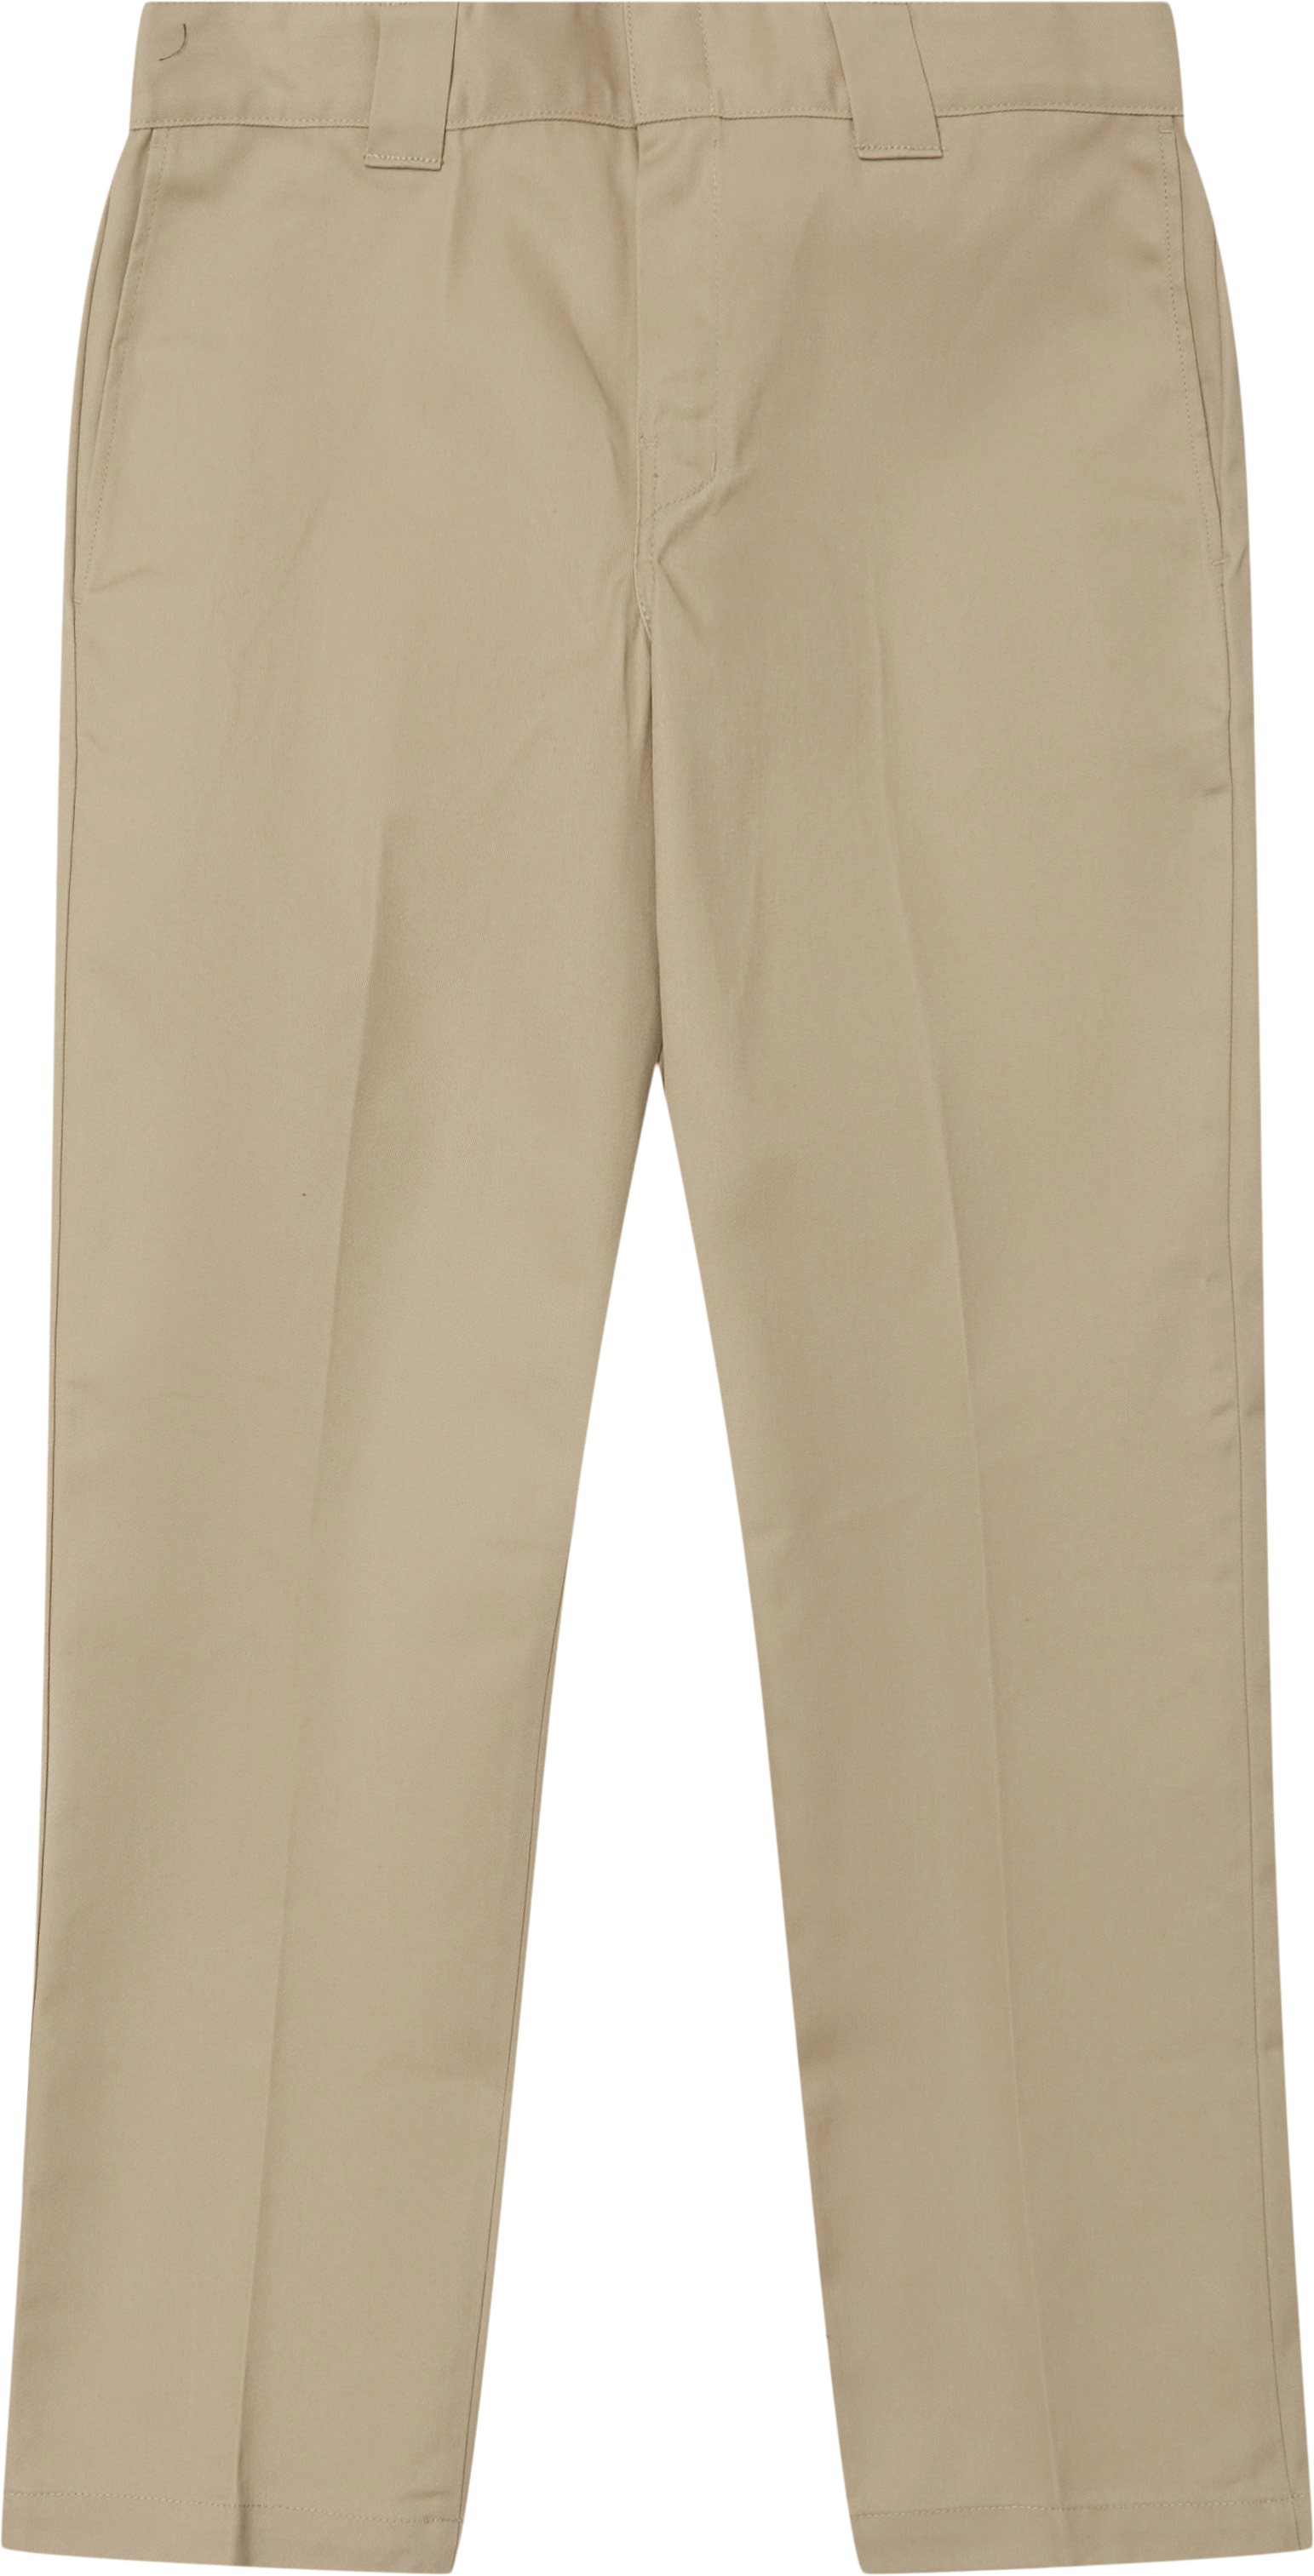 873 Work Pant - Trousers - Slim fit - Sand